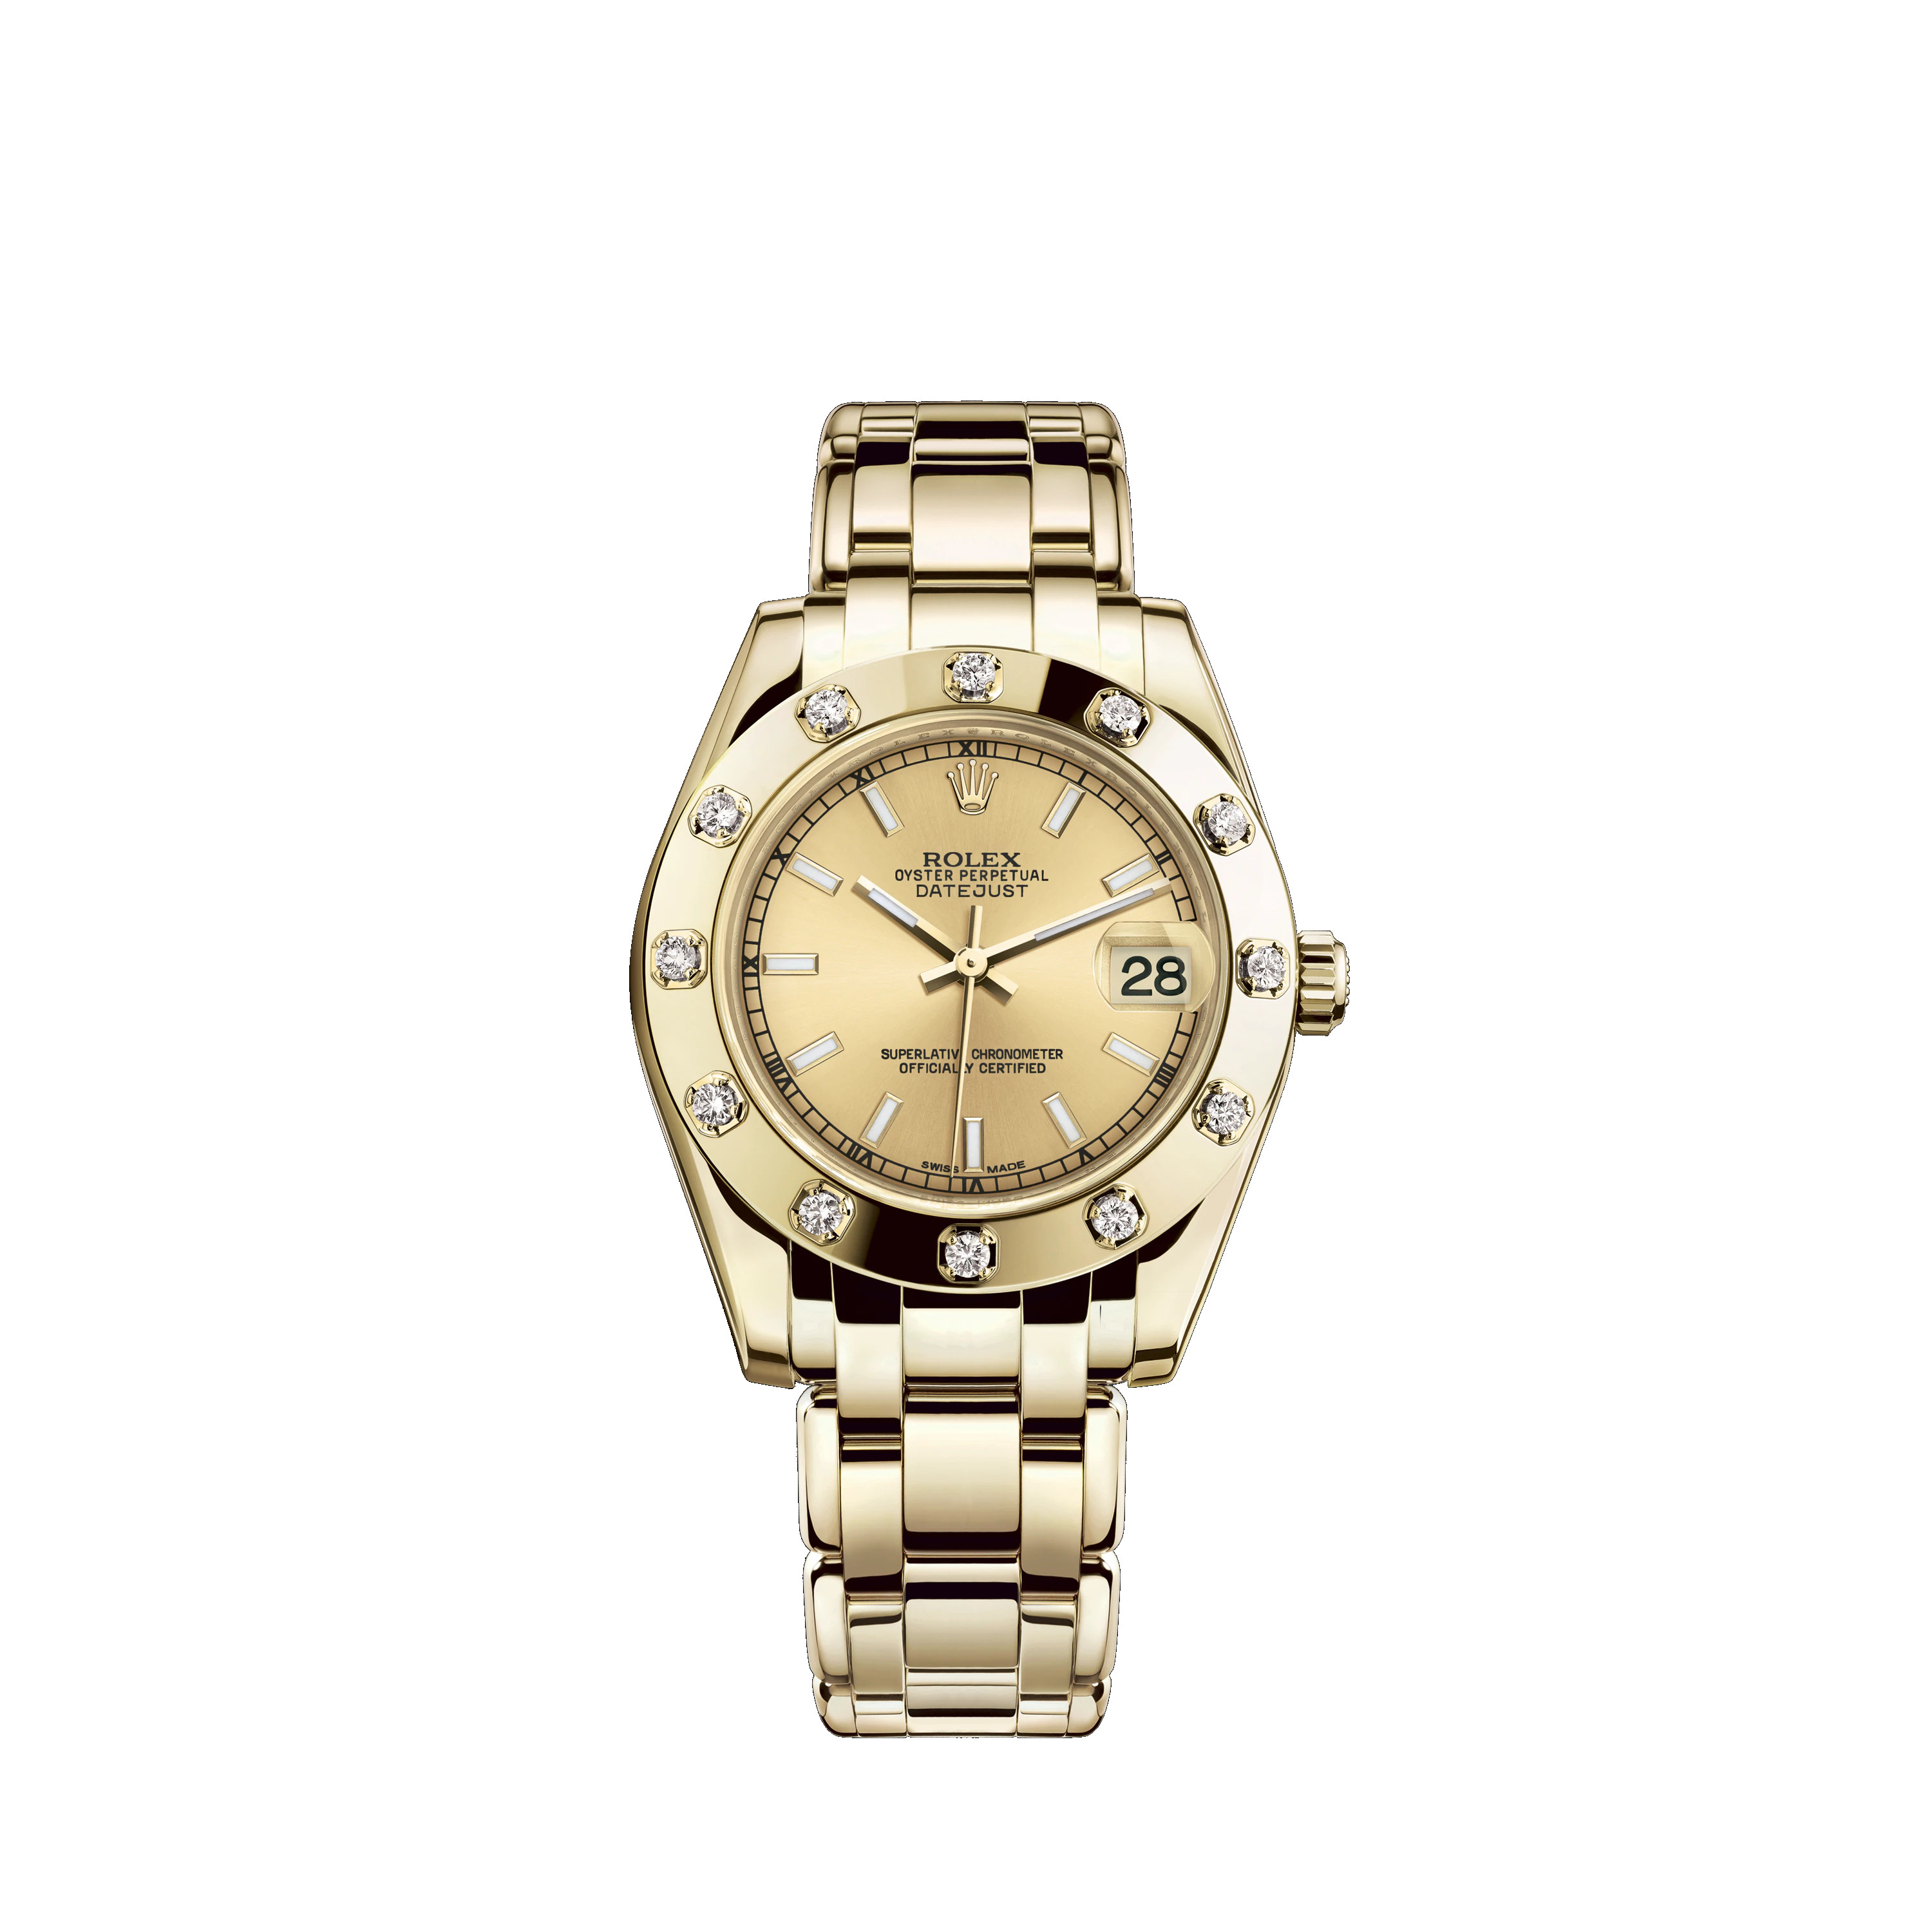 Pearlmaster 34 81318 Gold & Diamonds Watch (Champagne-Colour)